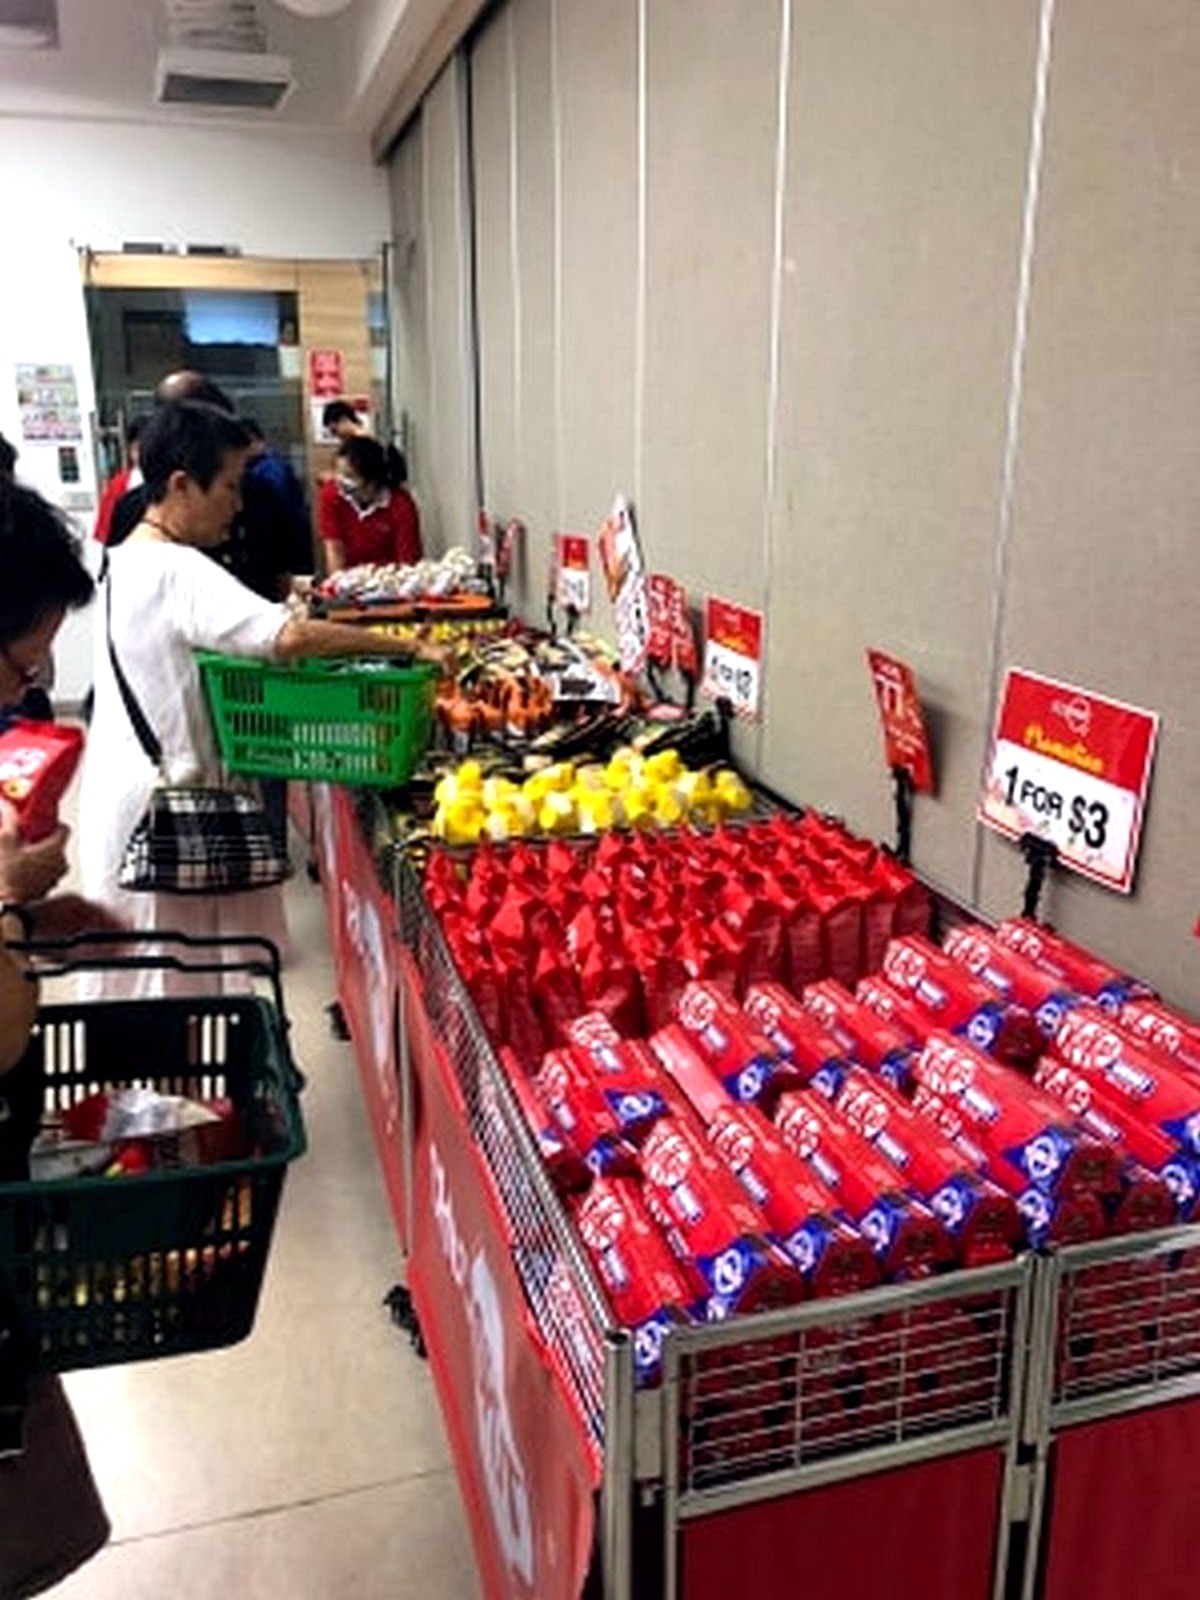 Choc-Spot-Warehouse-Sale-Singapore-2020-Clearance-Chocolate-Candy-Discounts-003 24 Jul-2 Aug 2020: Choc Spot Warehouse Sale! Up to 80% off Chocolates, Sweets, Chips, Biscuits!